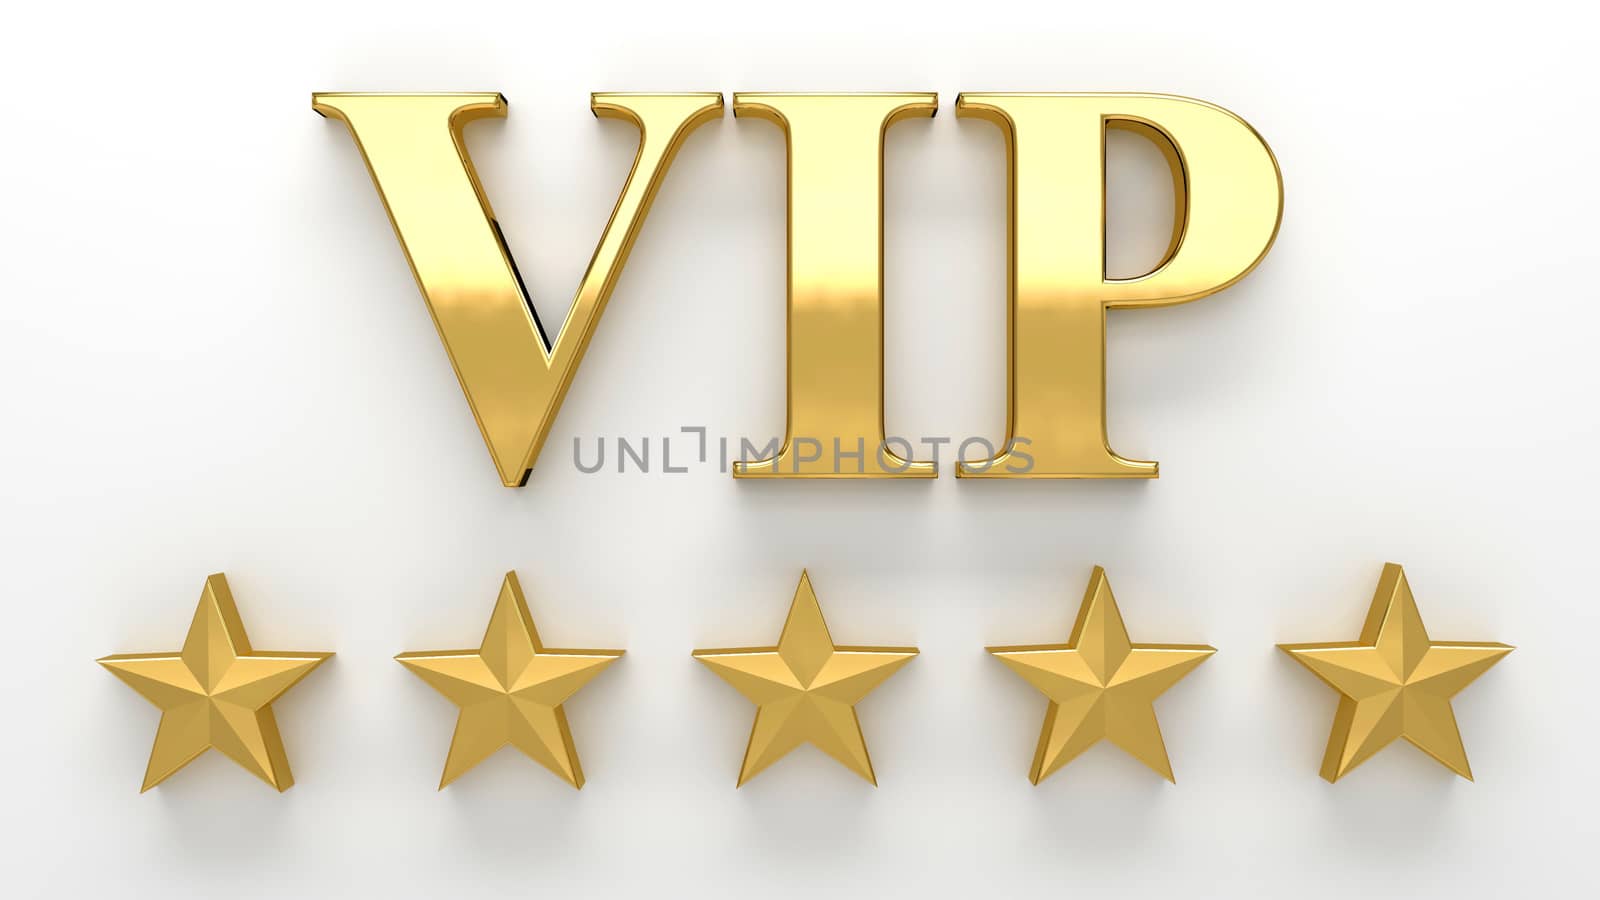 VIP - Very important person - gold 3D render on the wall background with soft shadow.